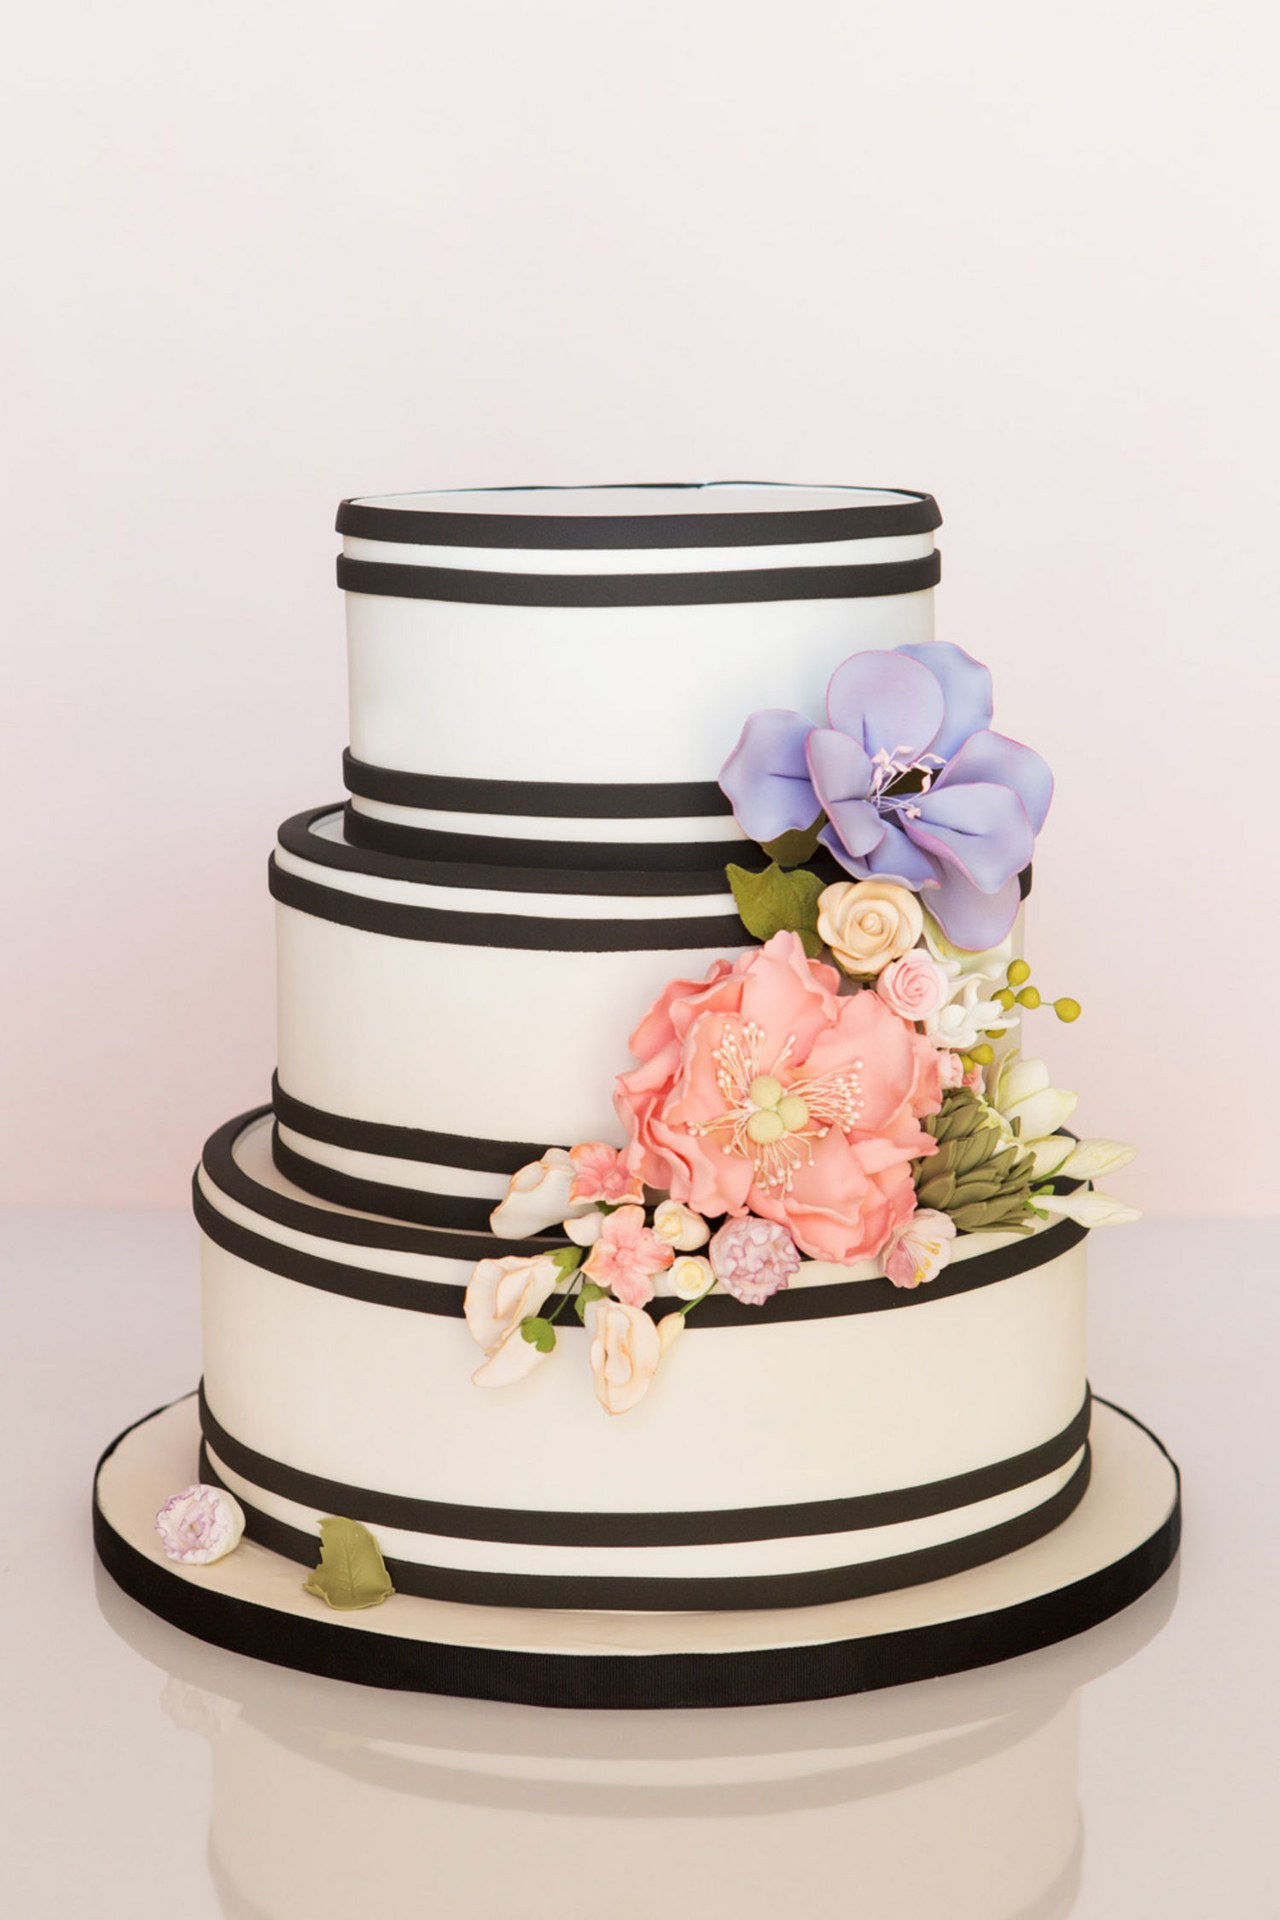 3 best nyc wedding cakes made in heaven cakes 0930